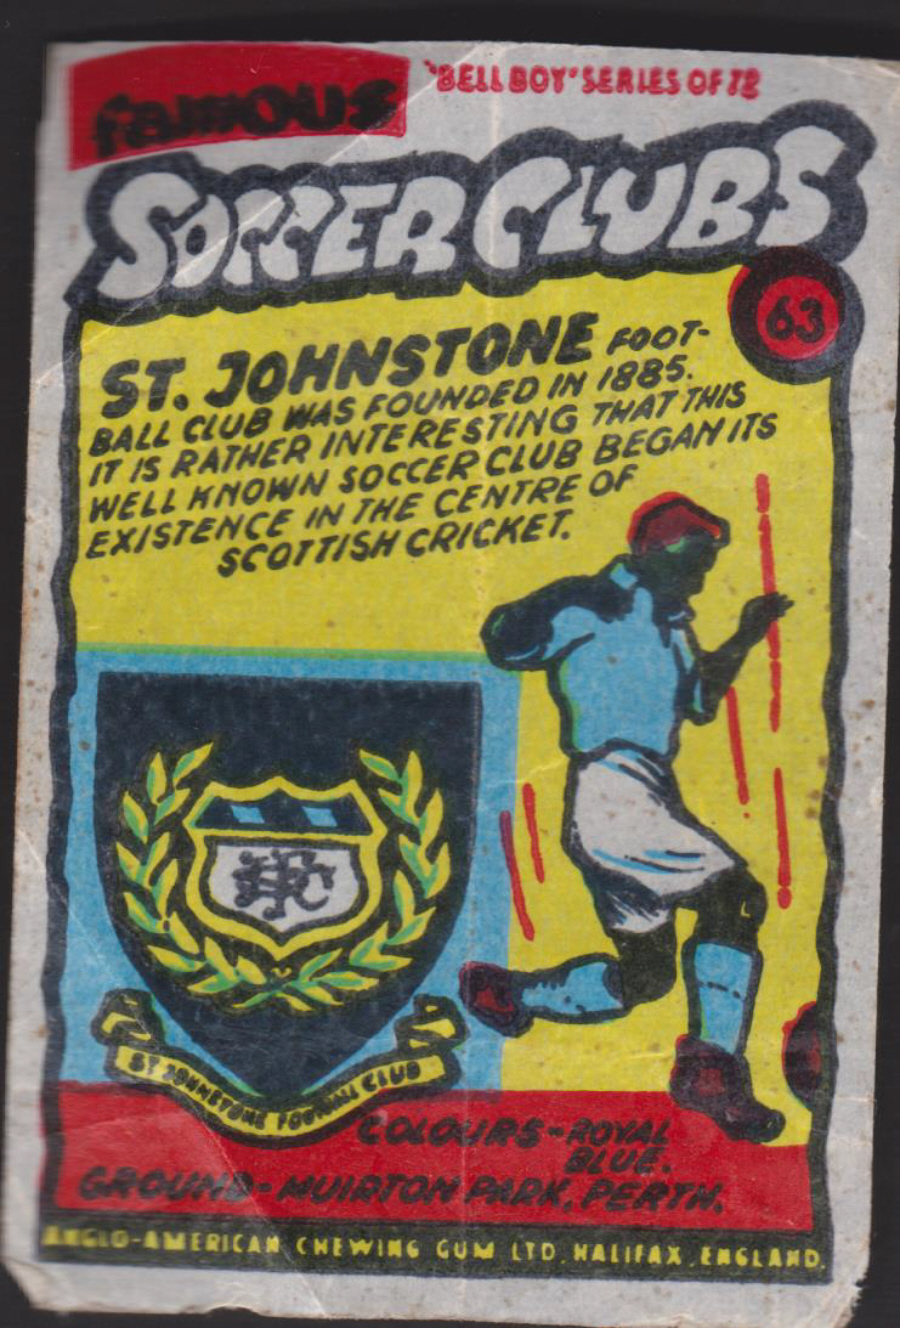 Anglo-American-Chewing-Gum-Wax-Wrapper-Famous-Soccer-Clubs-No-63 -St.Johnstone